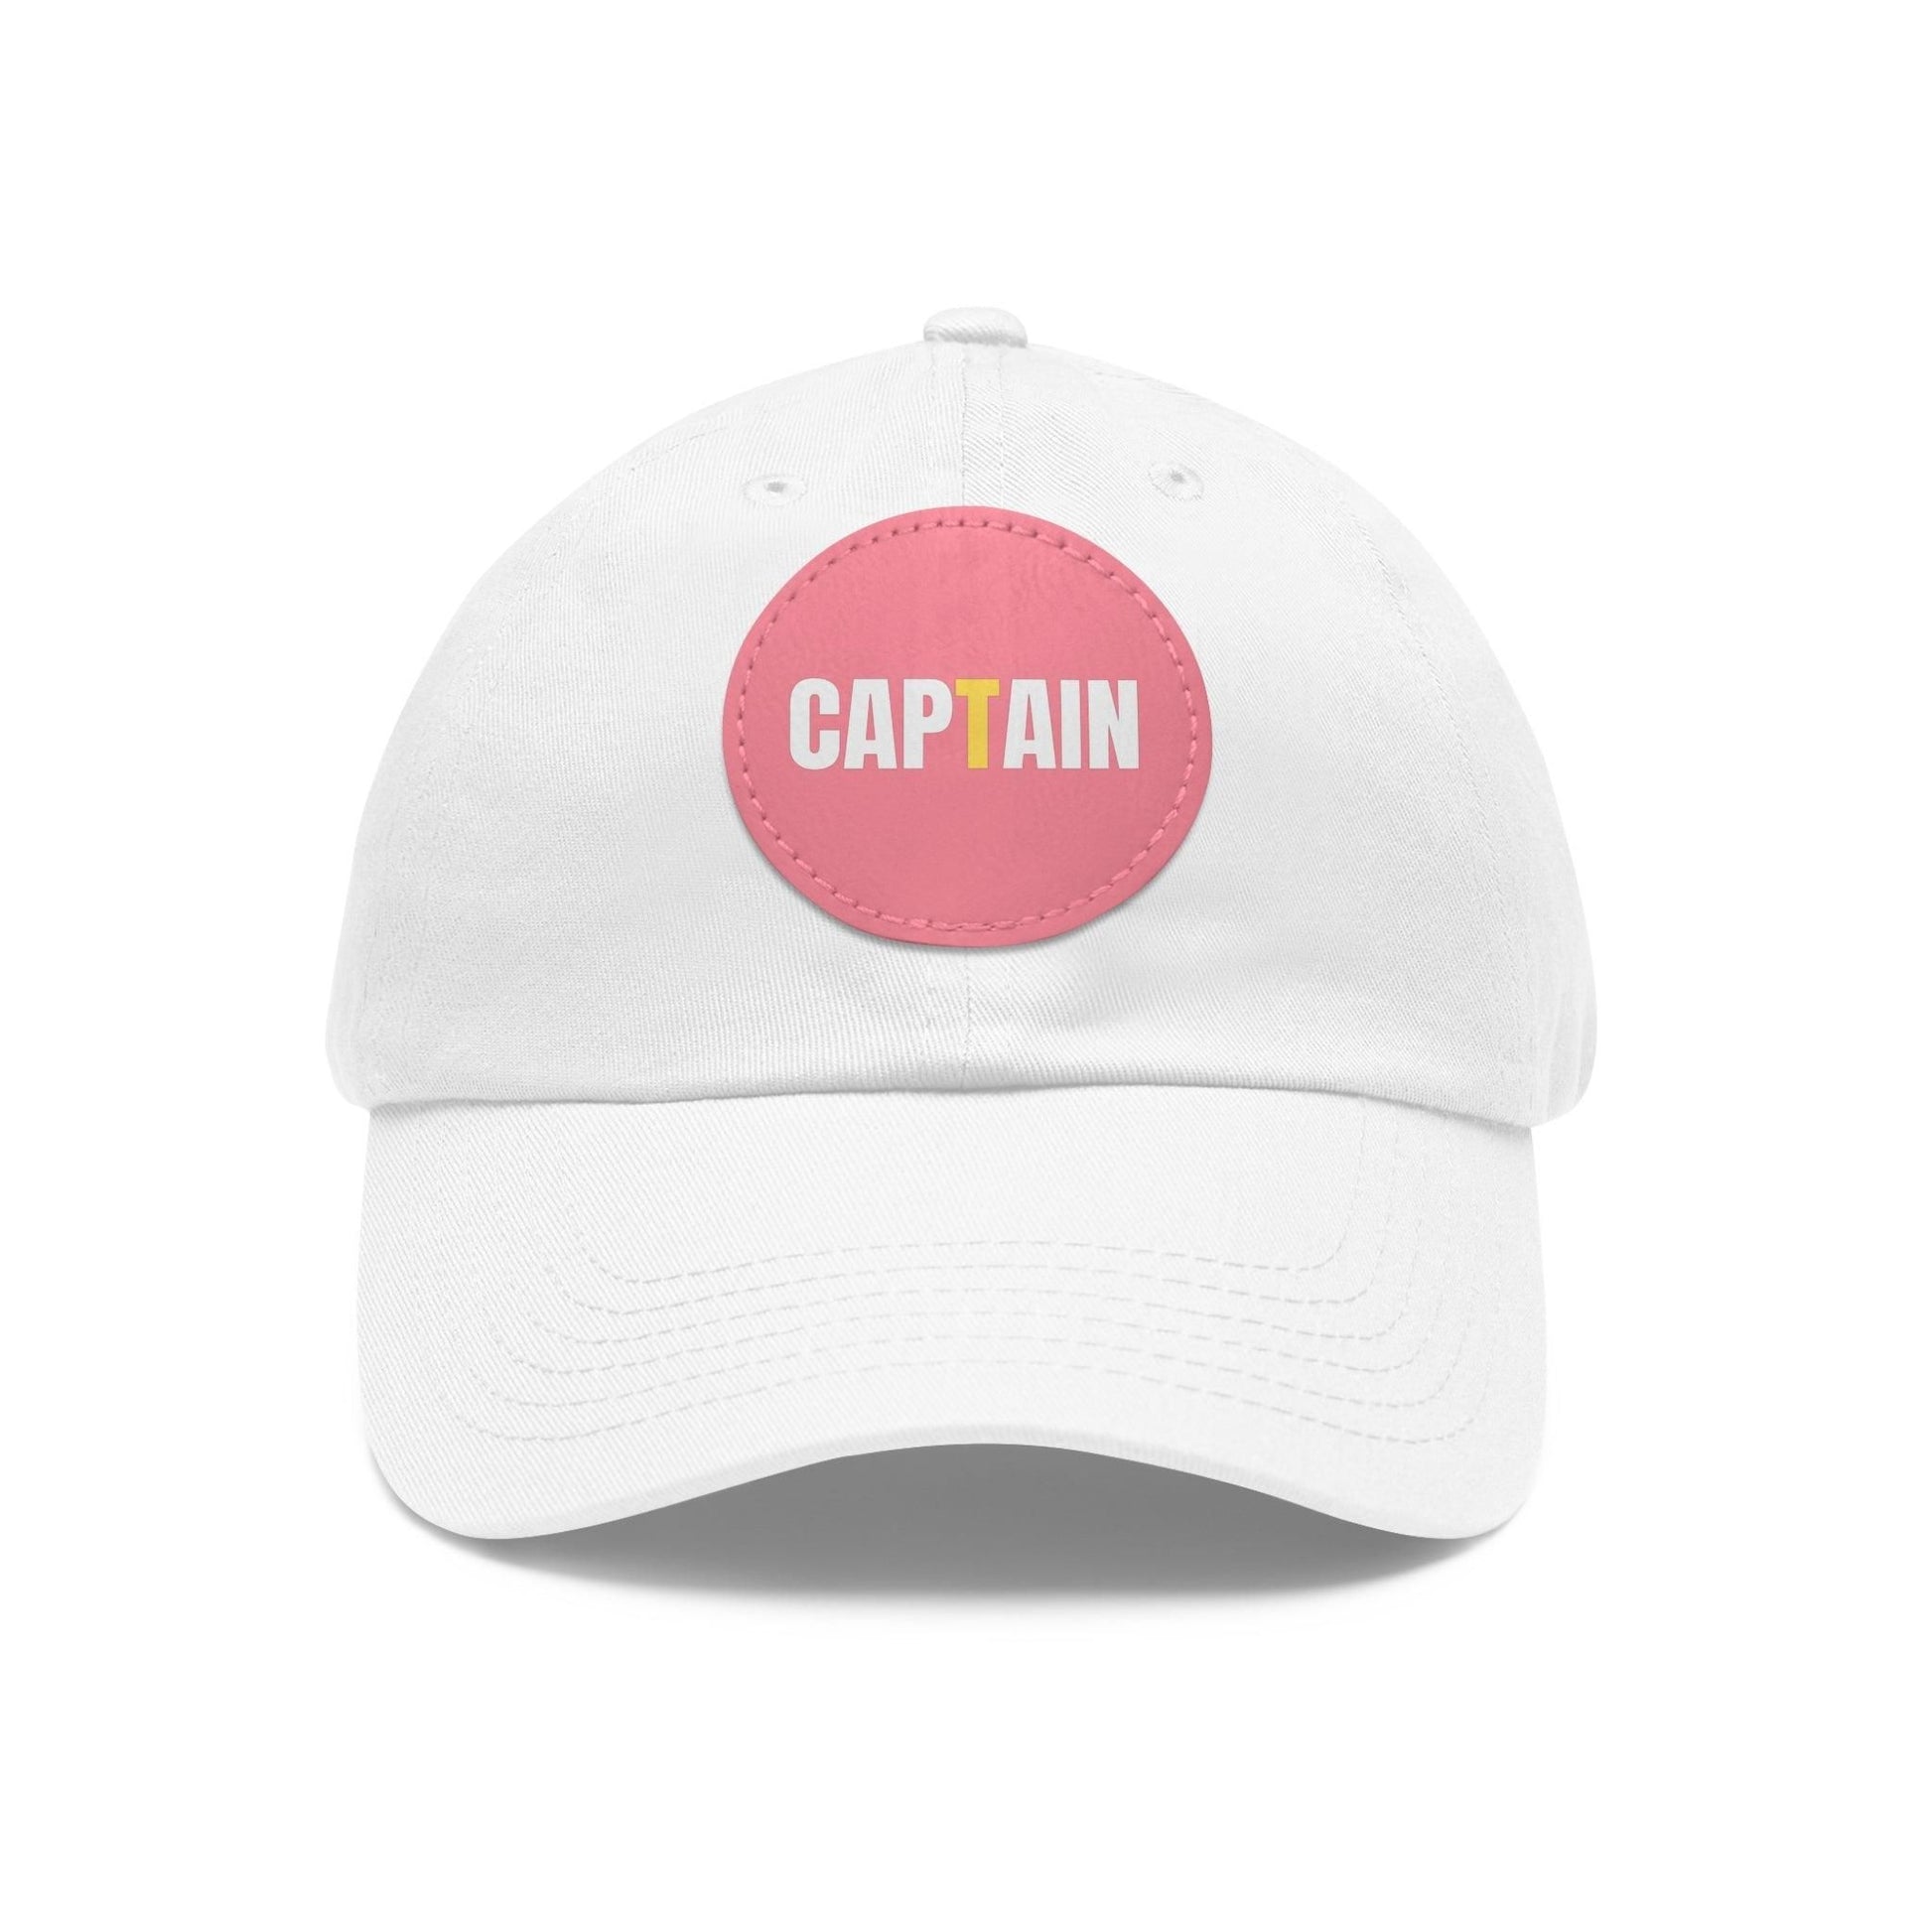 Captain Baseball Hat with Leather Patch Cap White / Pink patch Circle One size